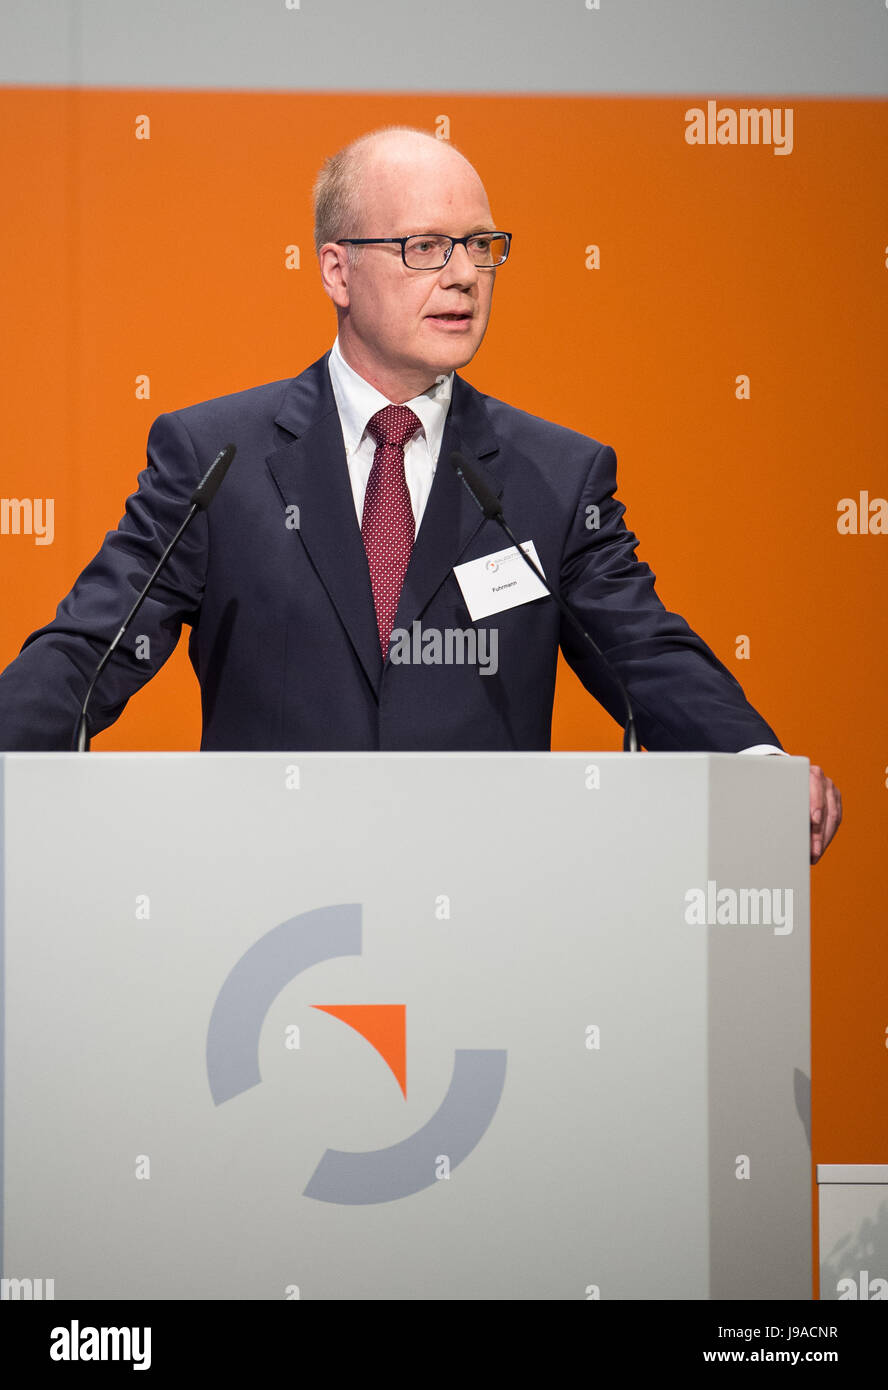 Braunschweig, Germany. 1st June, 2017. Heinz Joerg Fuhrmann, CEO of Salzgitter AG, speaking to shareholders at the general meeting of Salzgitter AG in Braunschweig, Germany, 1 June 2017. Photo: Silas Stein/dpa/Alamy Live News Stock Photo